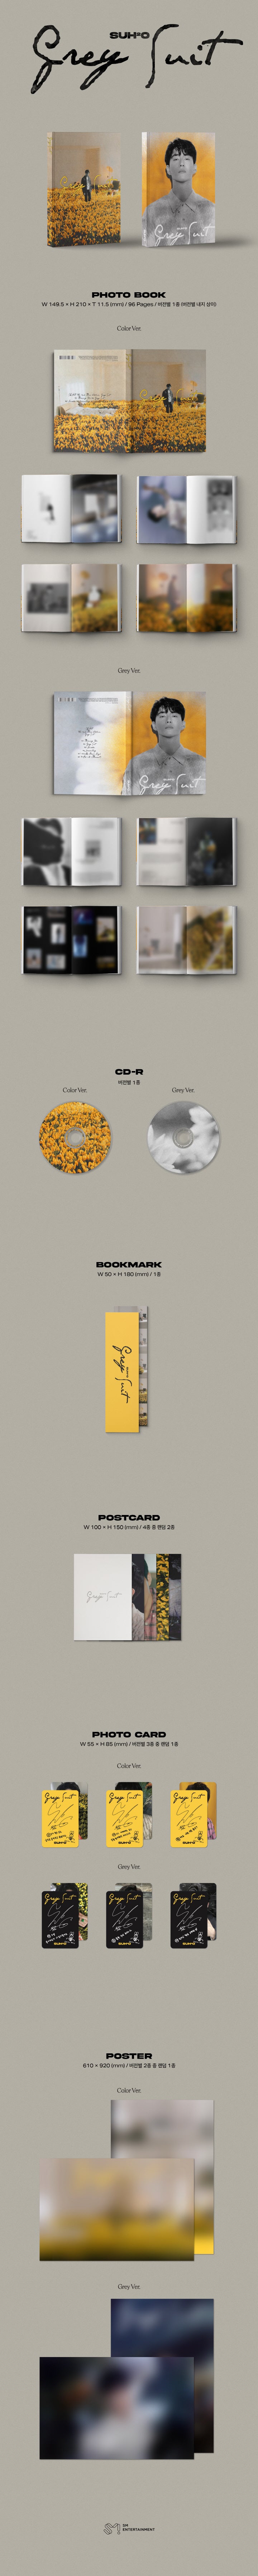 1 CD
1 Photo Book (96 pages)
1 Bookmark
2 Postcards (random out of 4 types)
1 Photo Card (random out of 3 types)